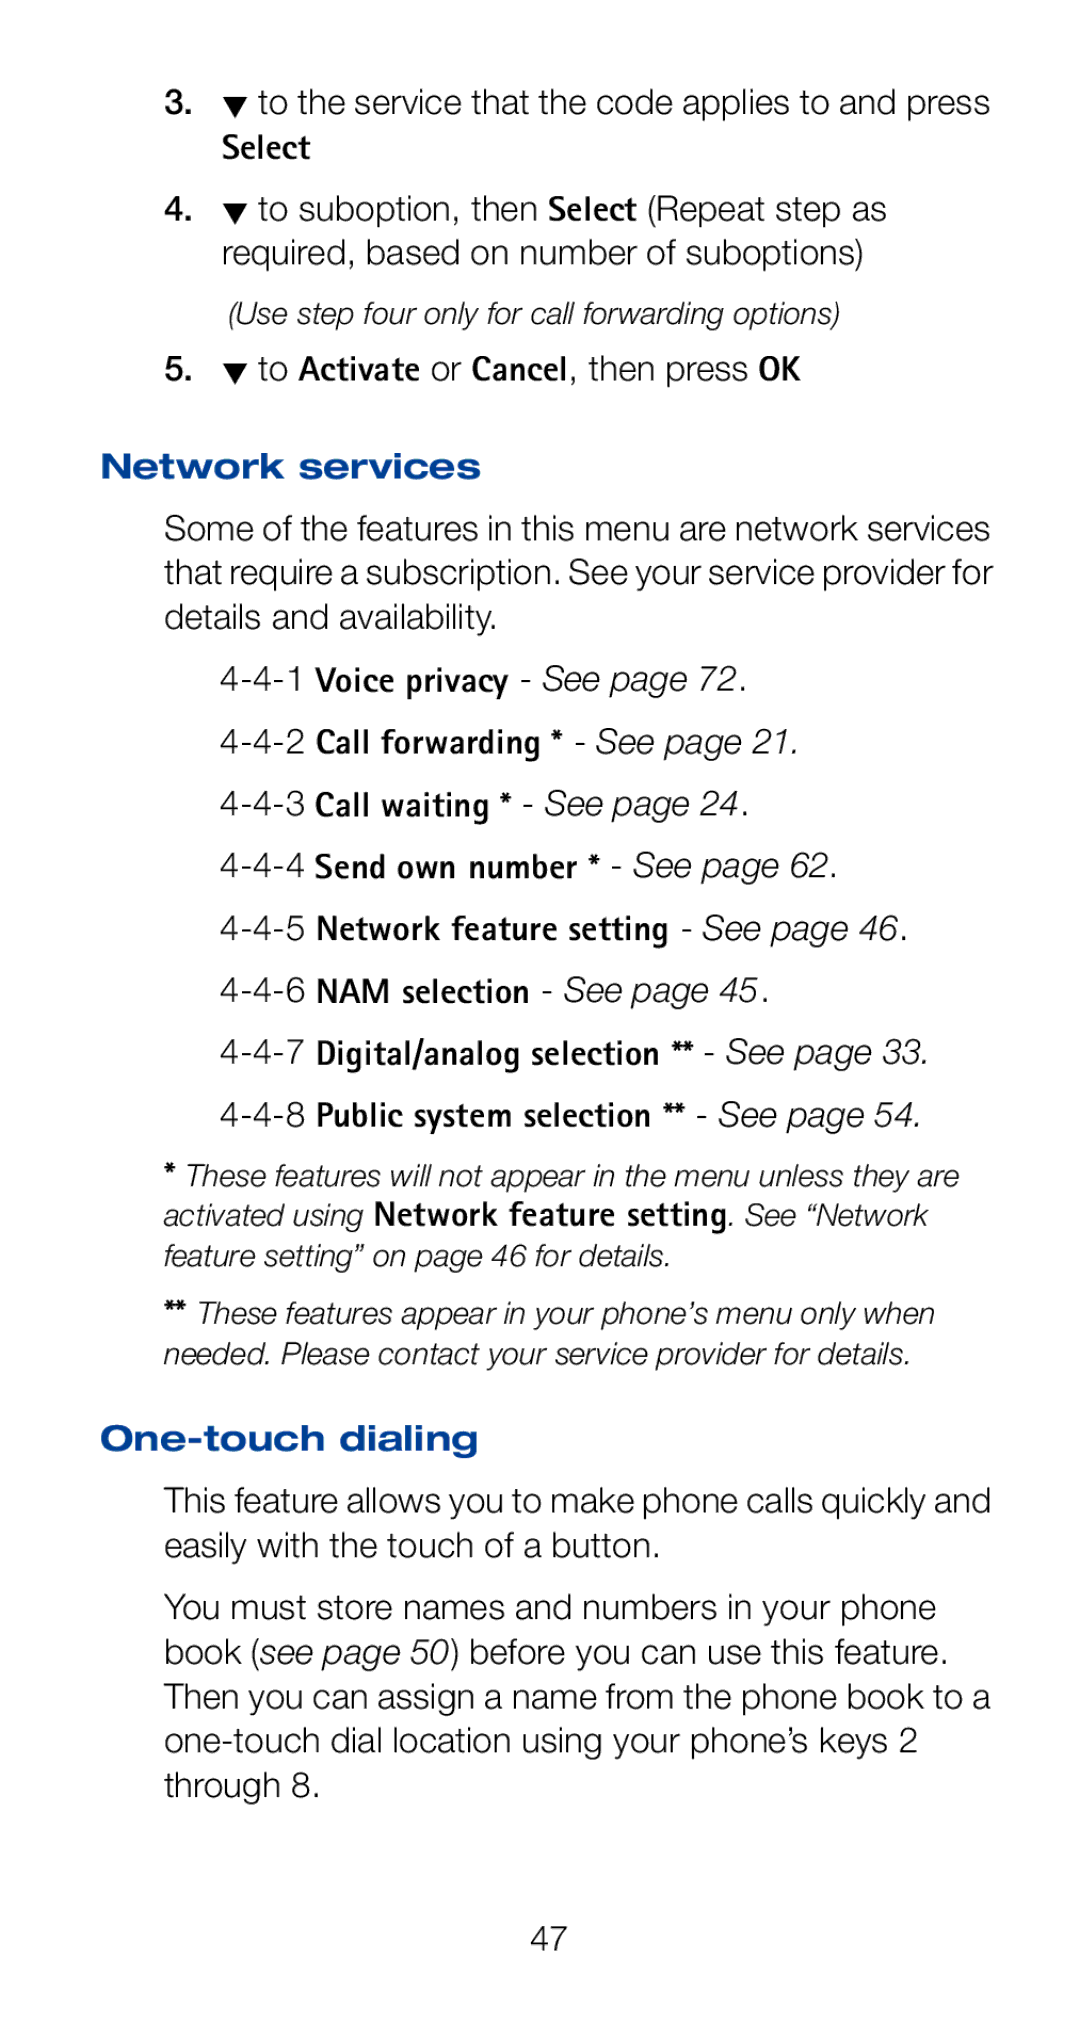 Nokia 6161i To the service that the code applies to and press, To Activate or Cancel, then press OK, Network services 